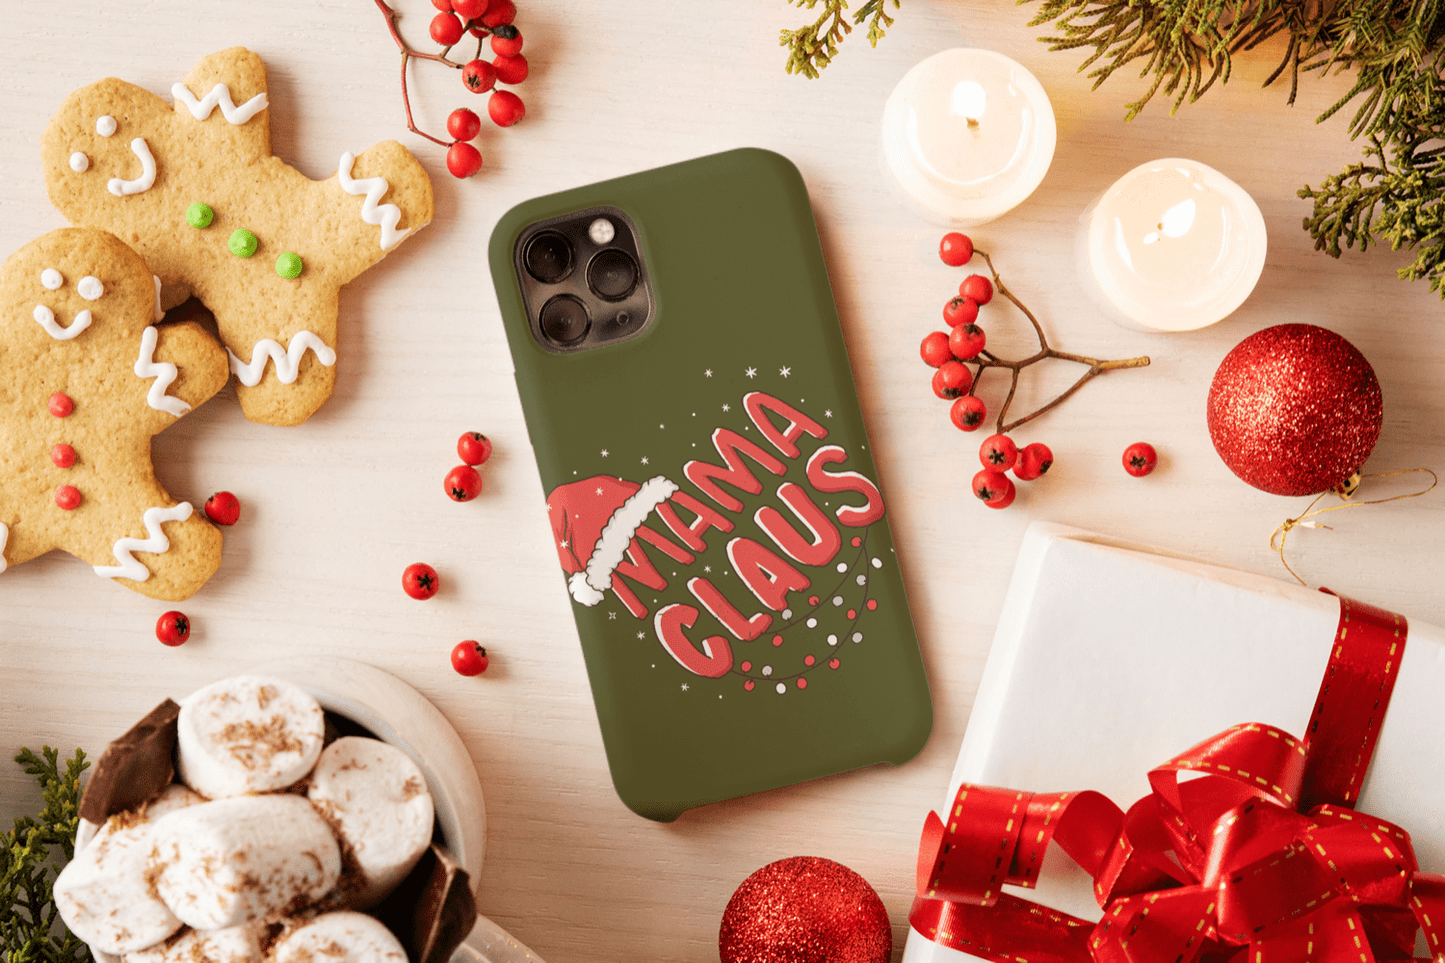 iPhone Handyhülle - Mama Claus Weihnachtsmotiv - SmartPhone Cover